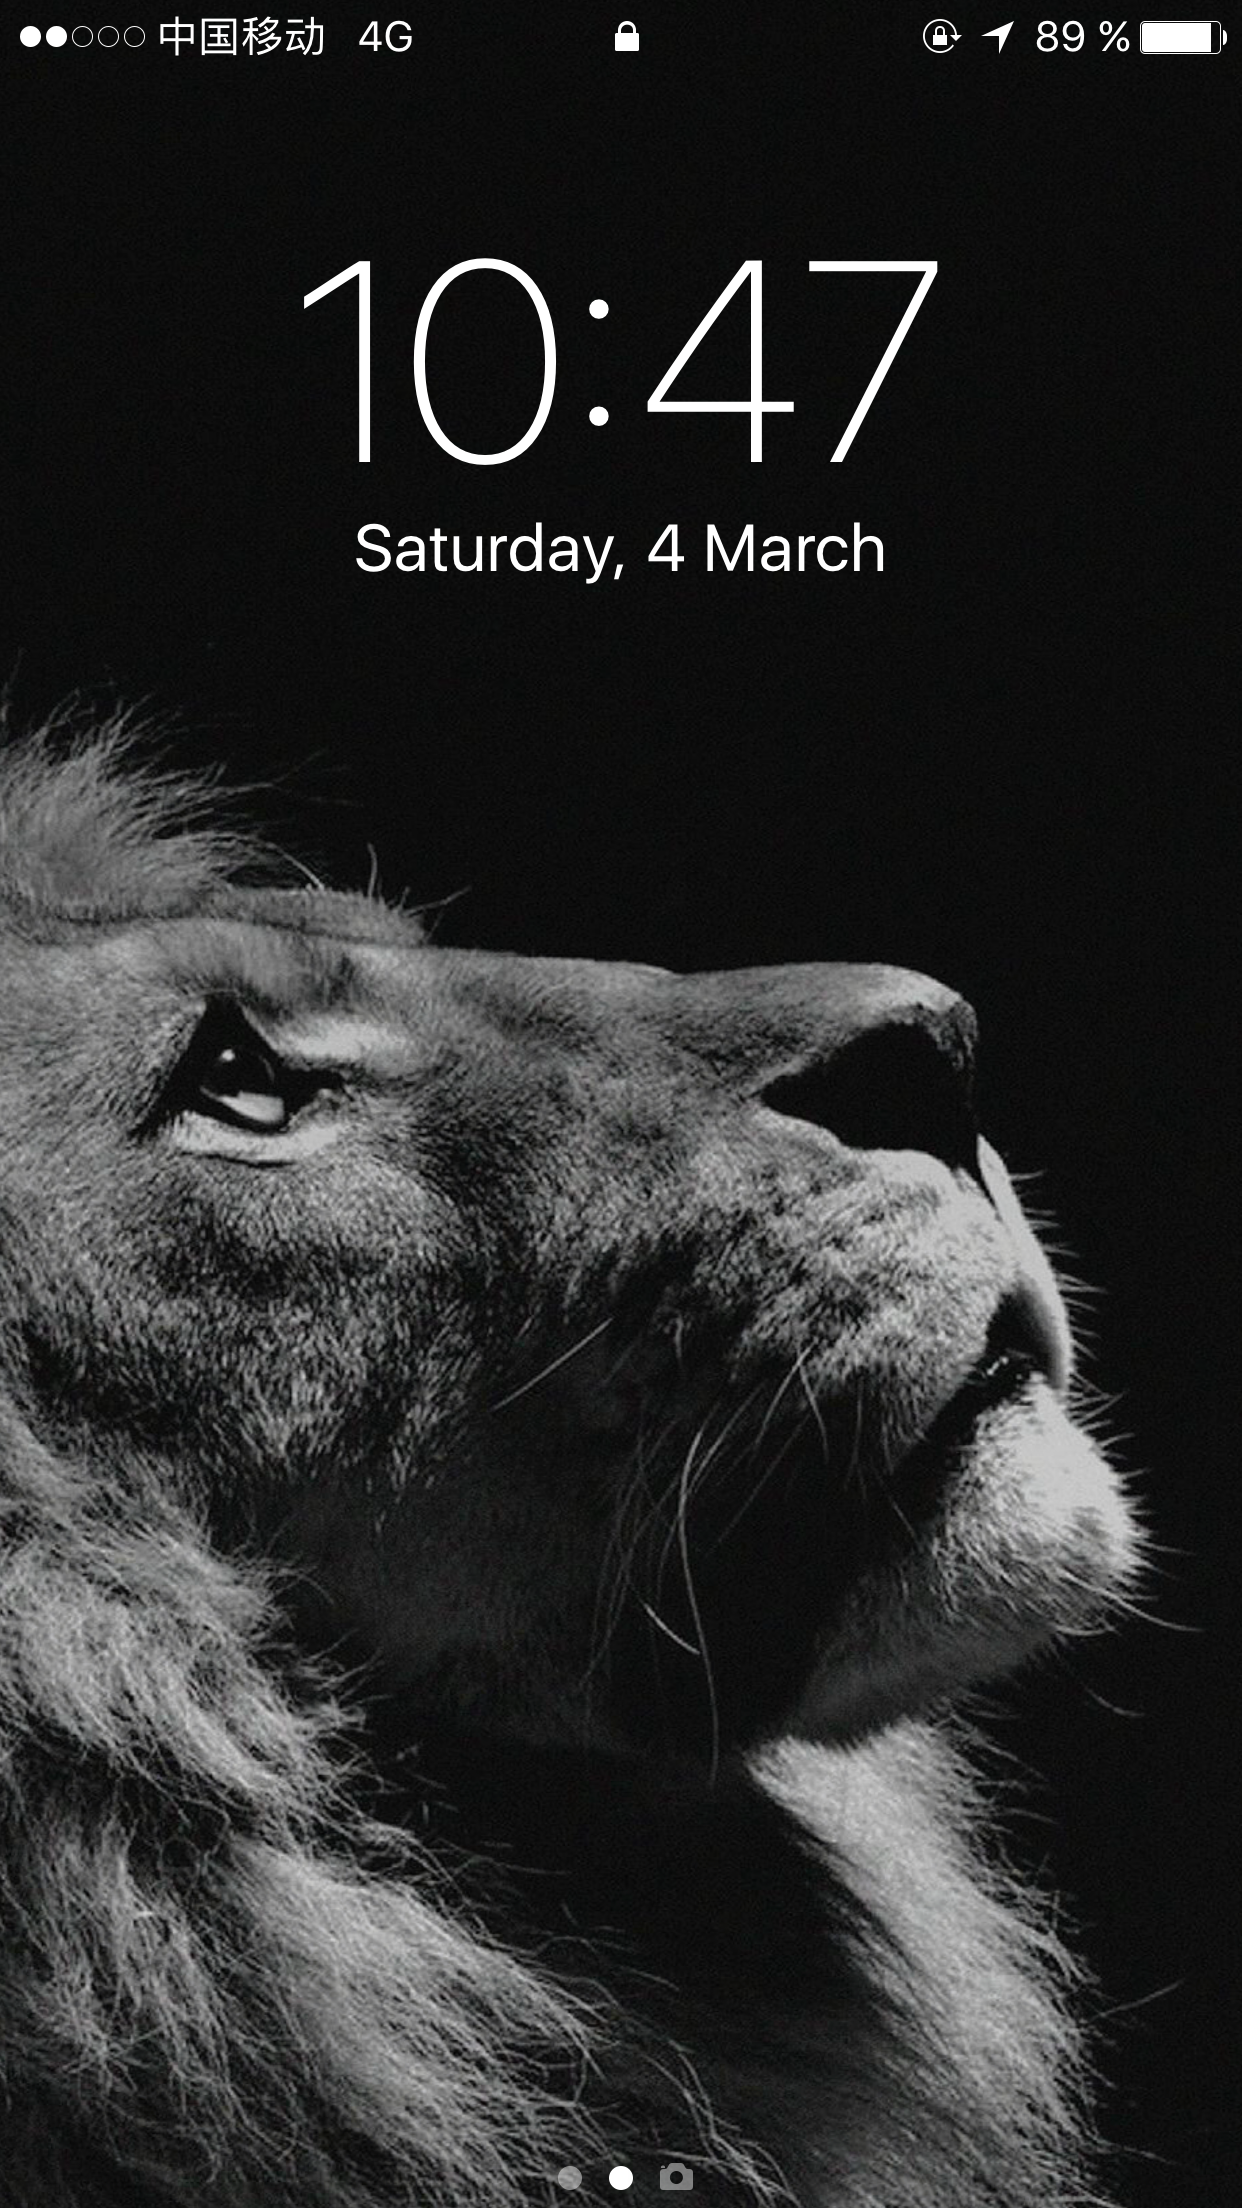 Post Your iPhone Wallpaper [MERGED] | Page 3 | MacRumors Forums